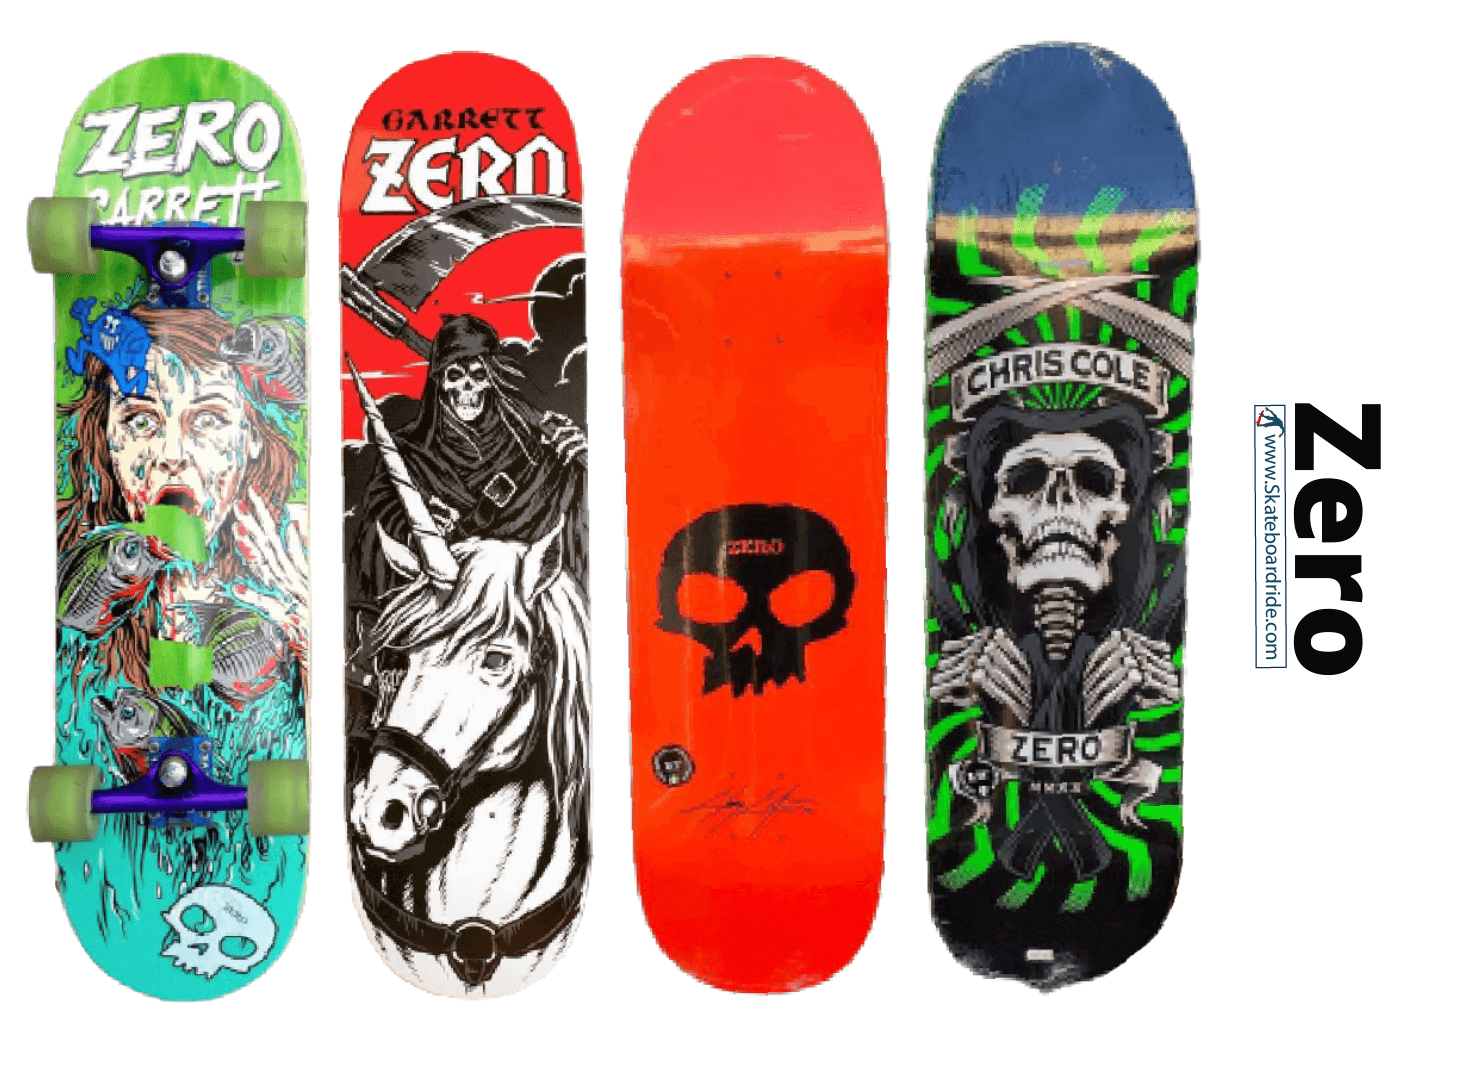 10 Best Skateboard Brands In 2022 Reviews and Complete Buying Guide